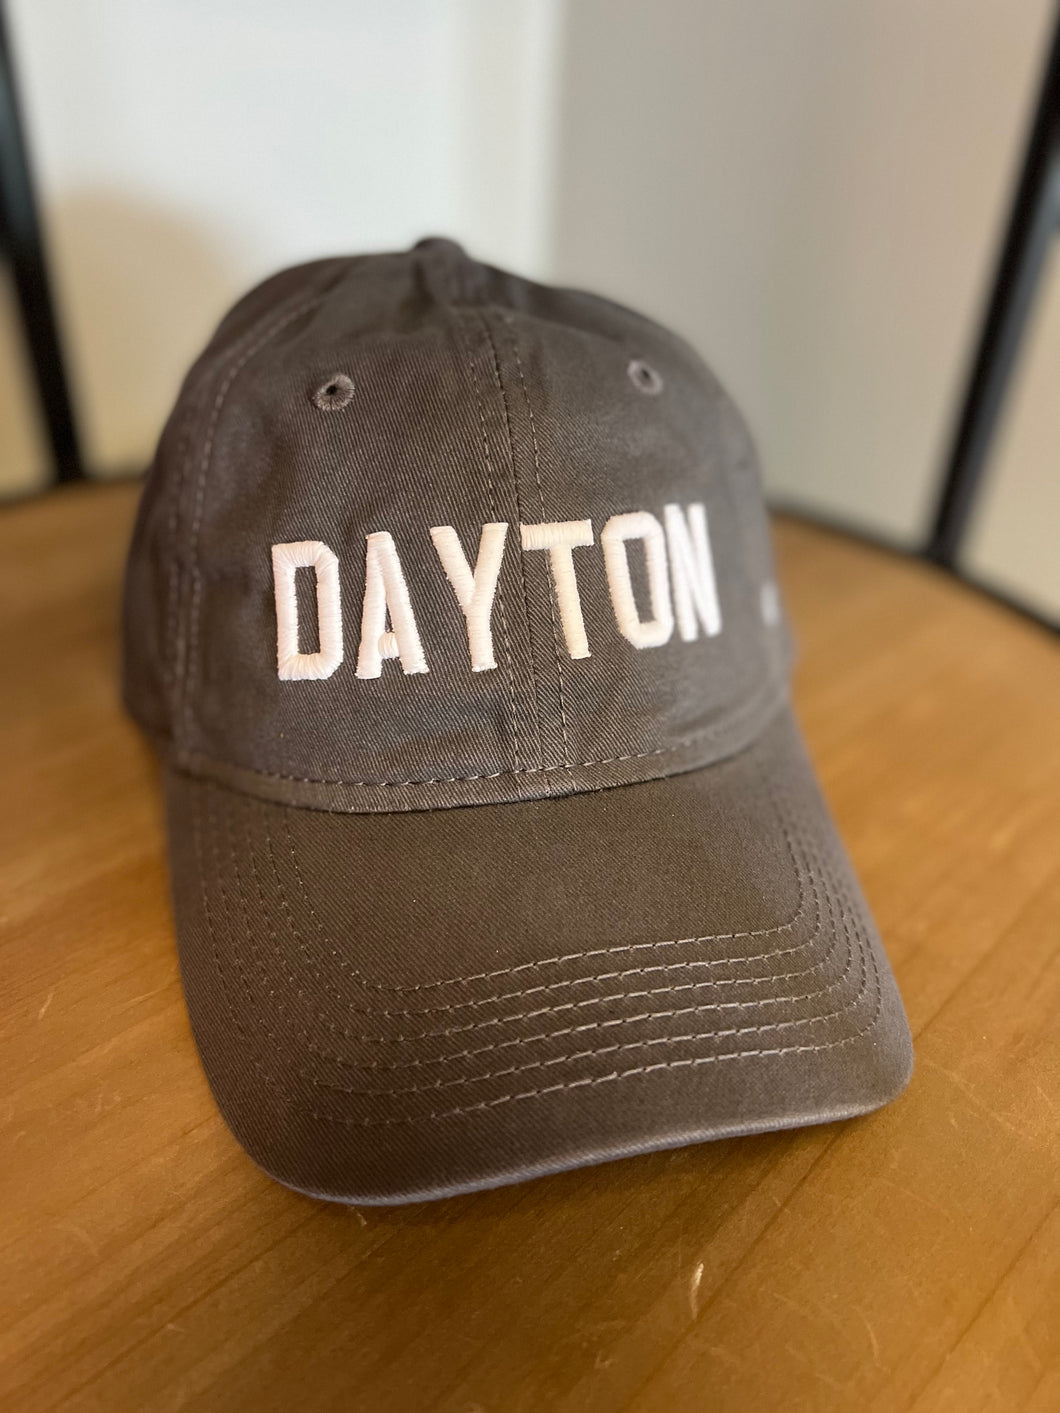 Embroidered Dayton hat - Charcoal Cotton